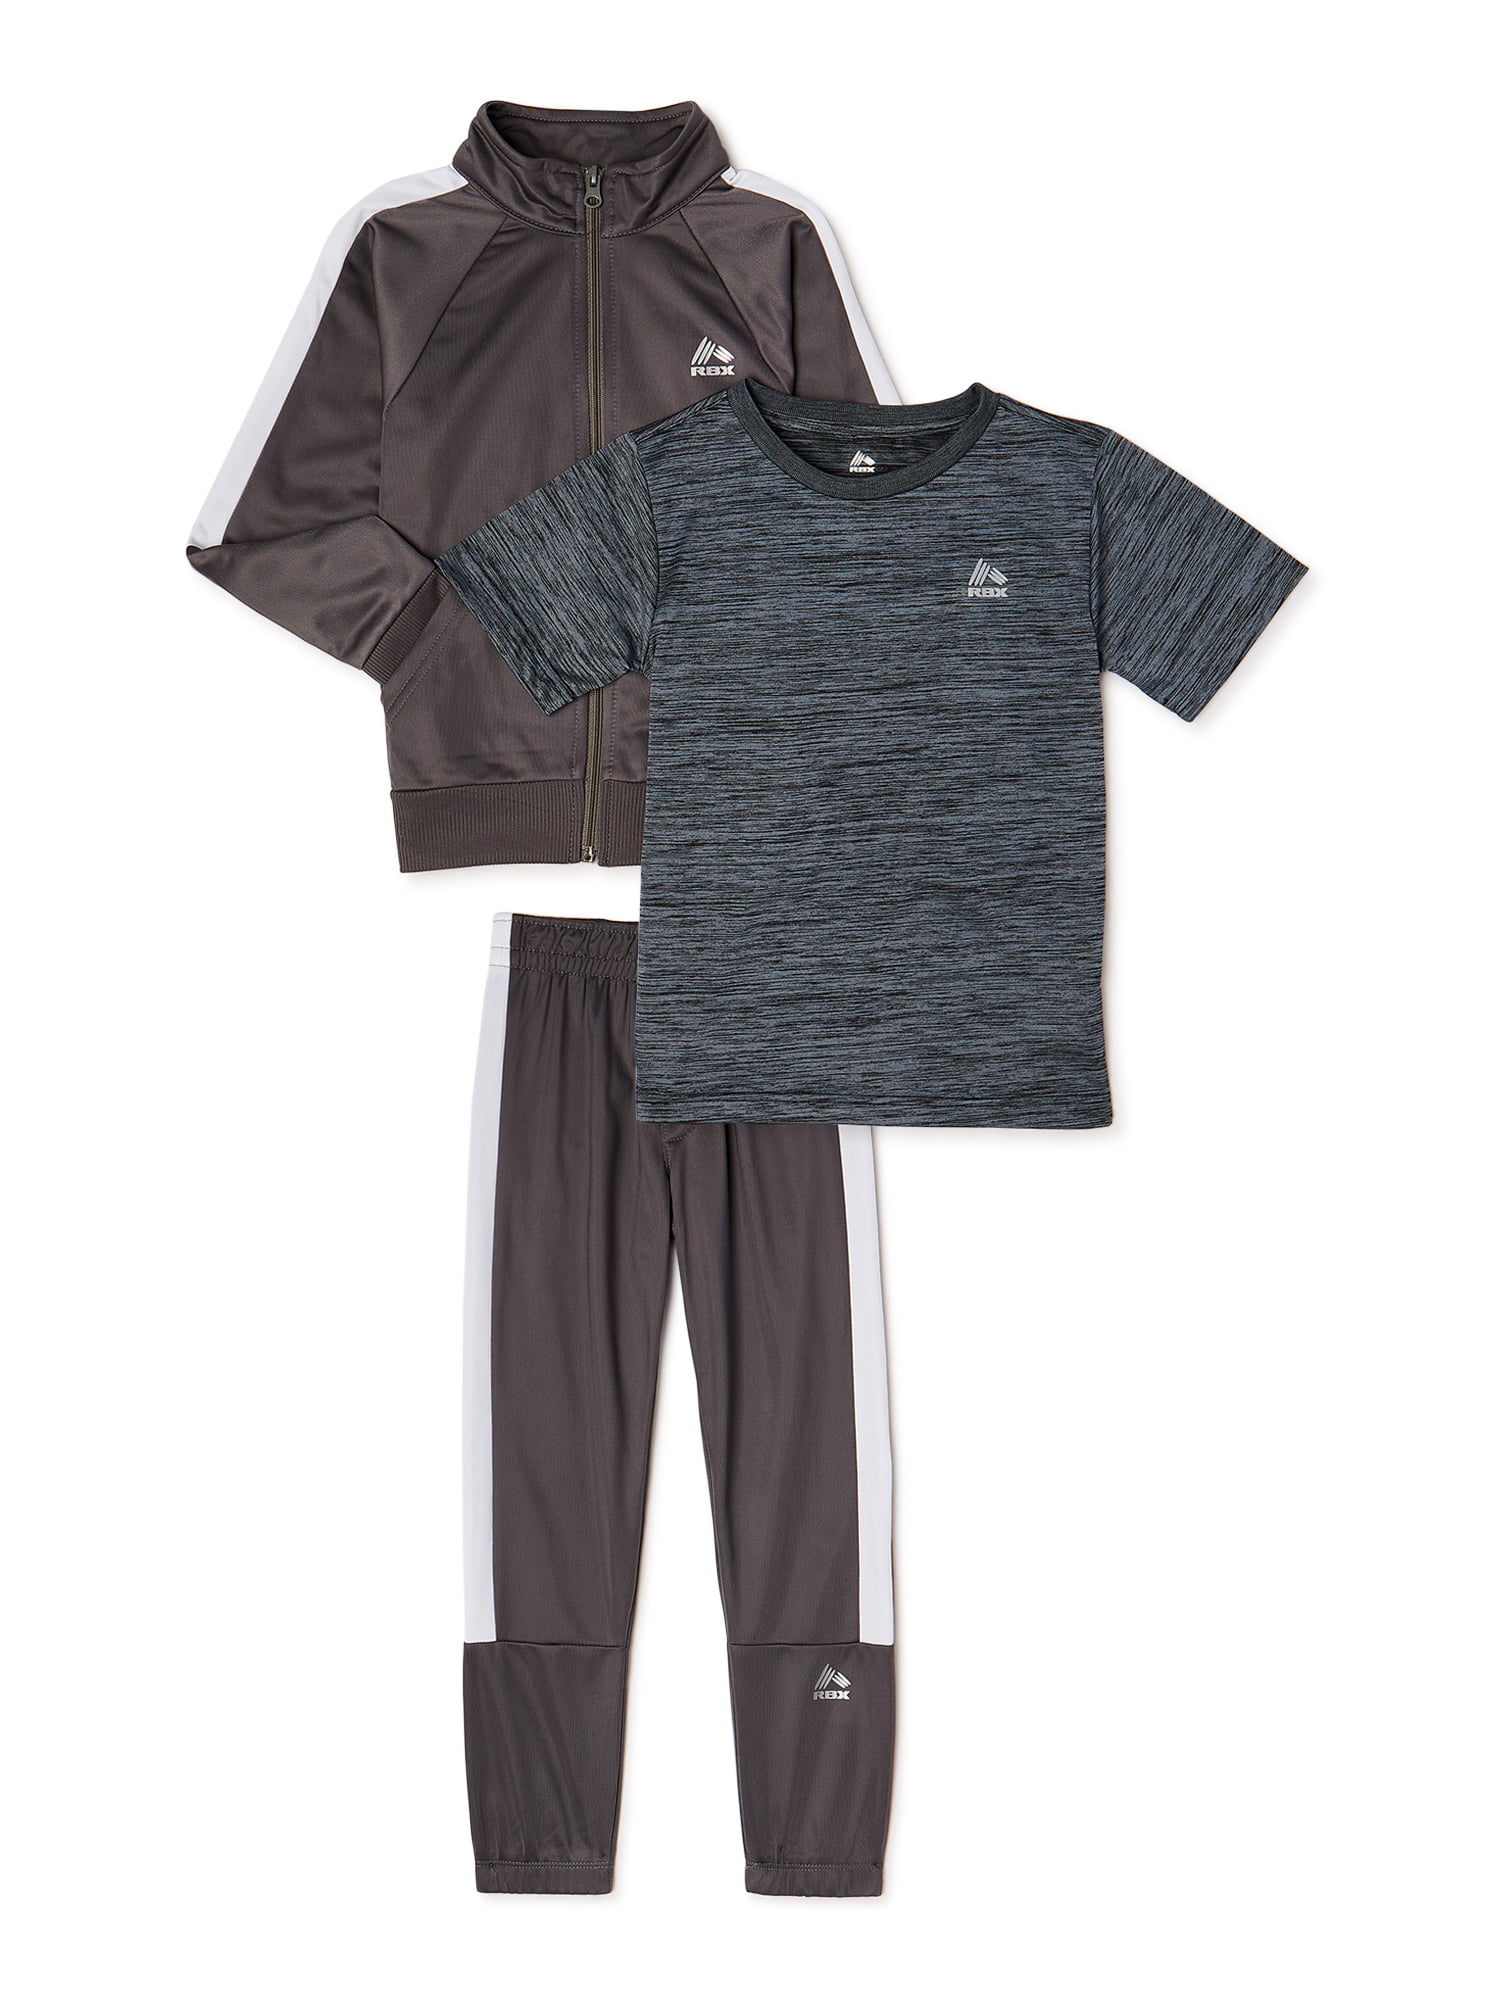 Hind Boys Athleisure T-Shirt and Jogger Track Set Toddler/Little/Big Boys 2 Full Sets